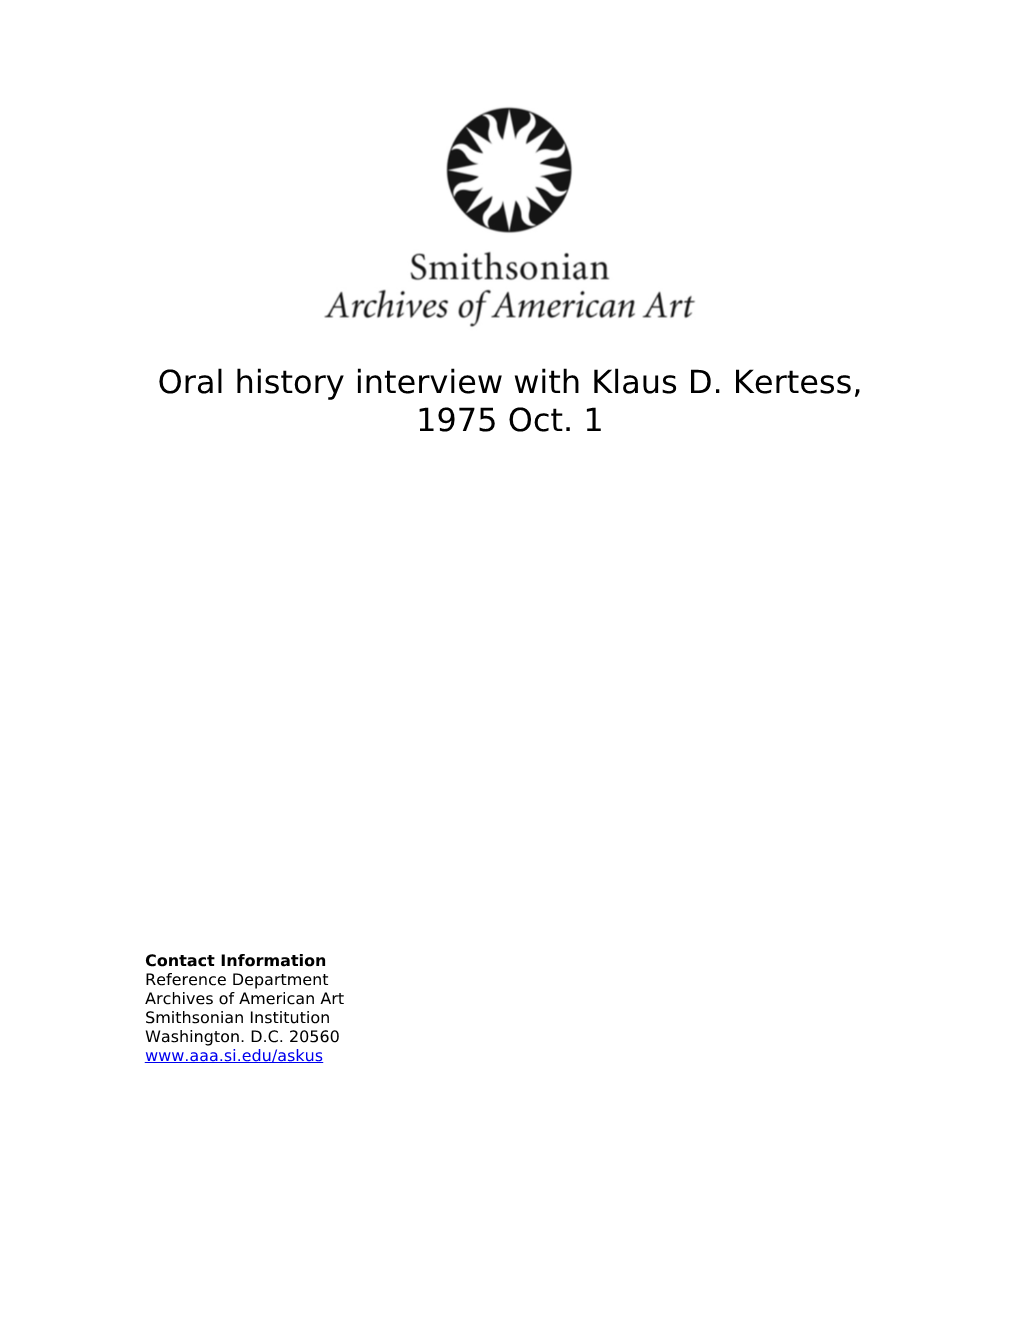 Oral History Interview with Klaus D. Kertess, 1975 Oct. 1